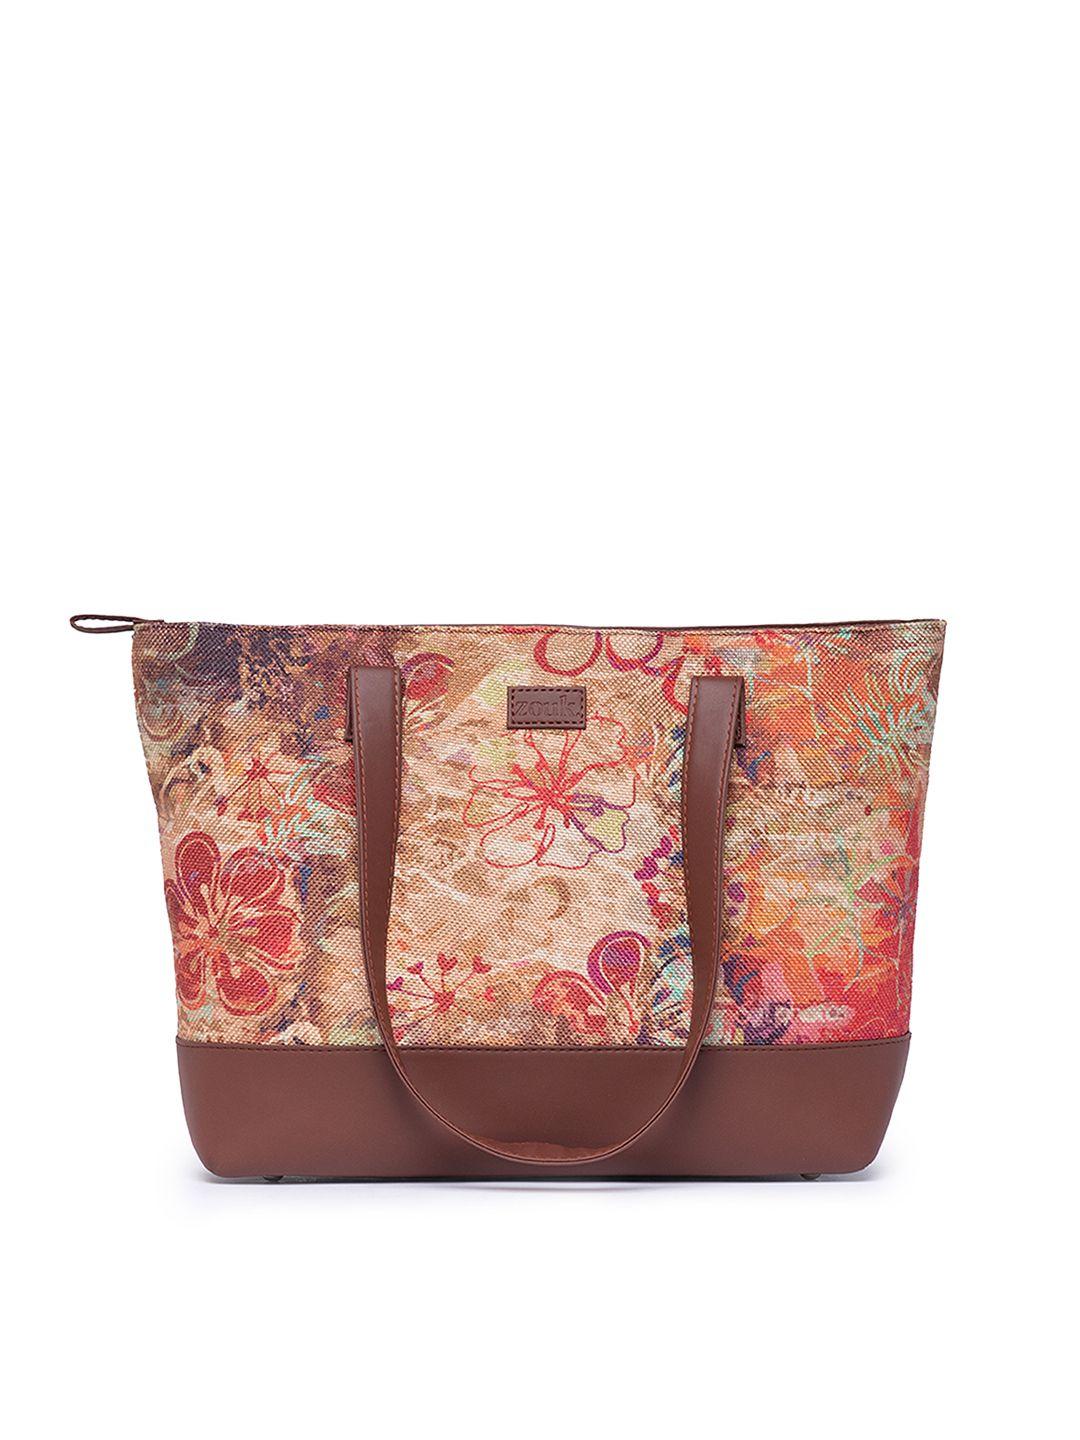 zouk-floral-printed-structured-tote-bag